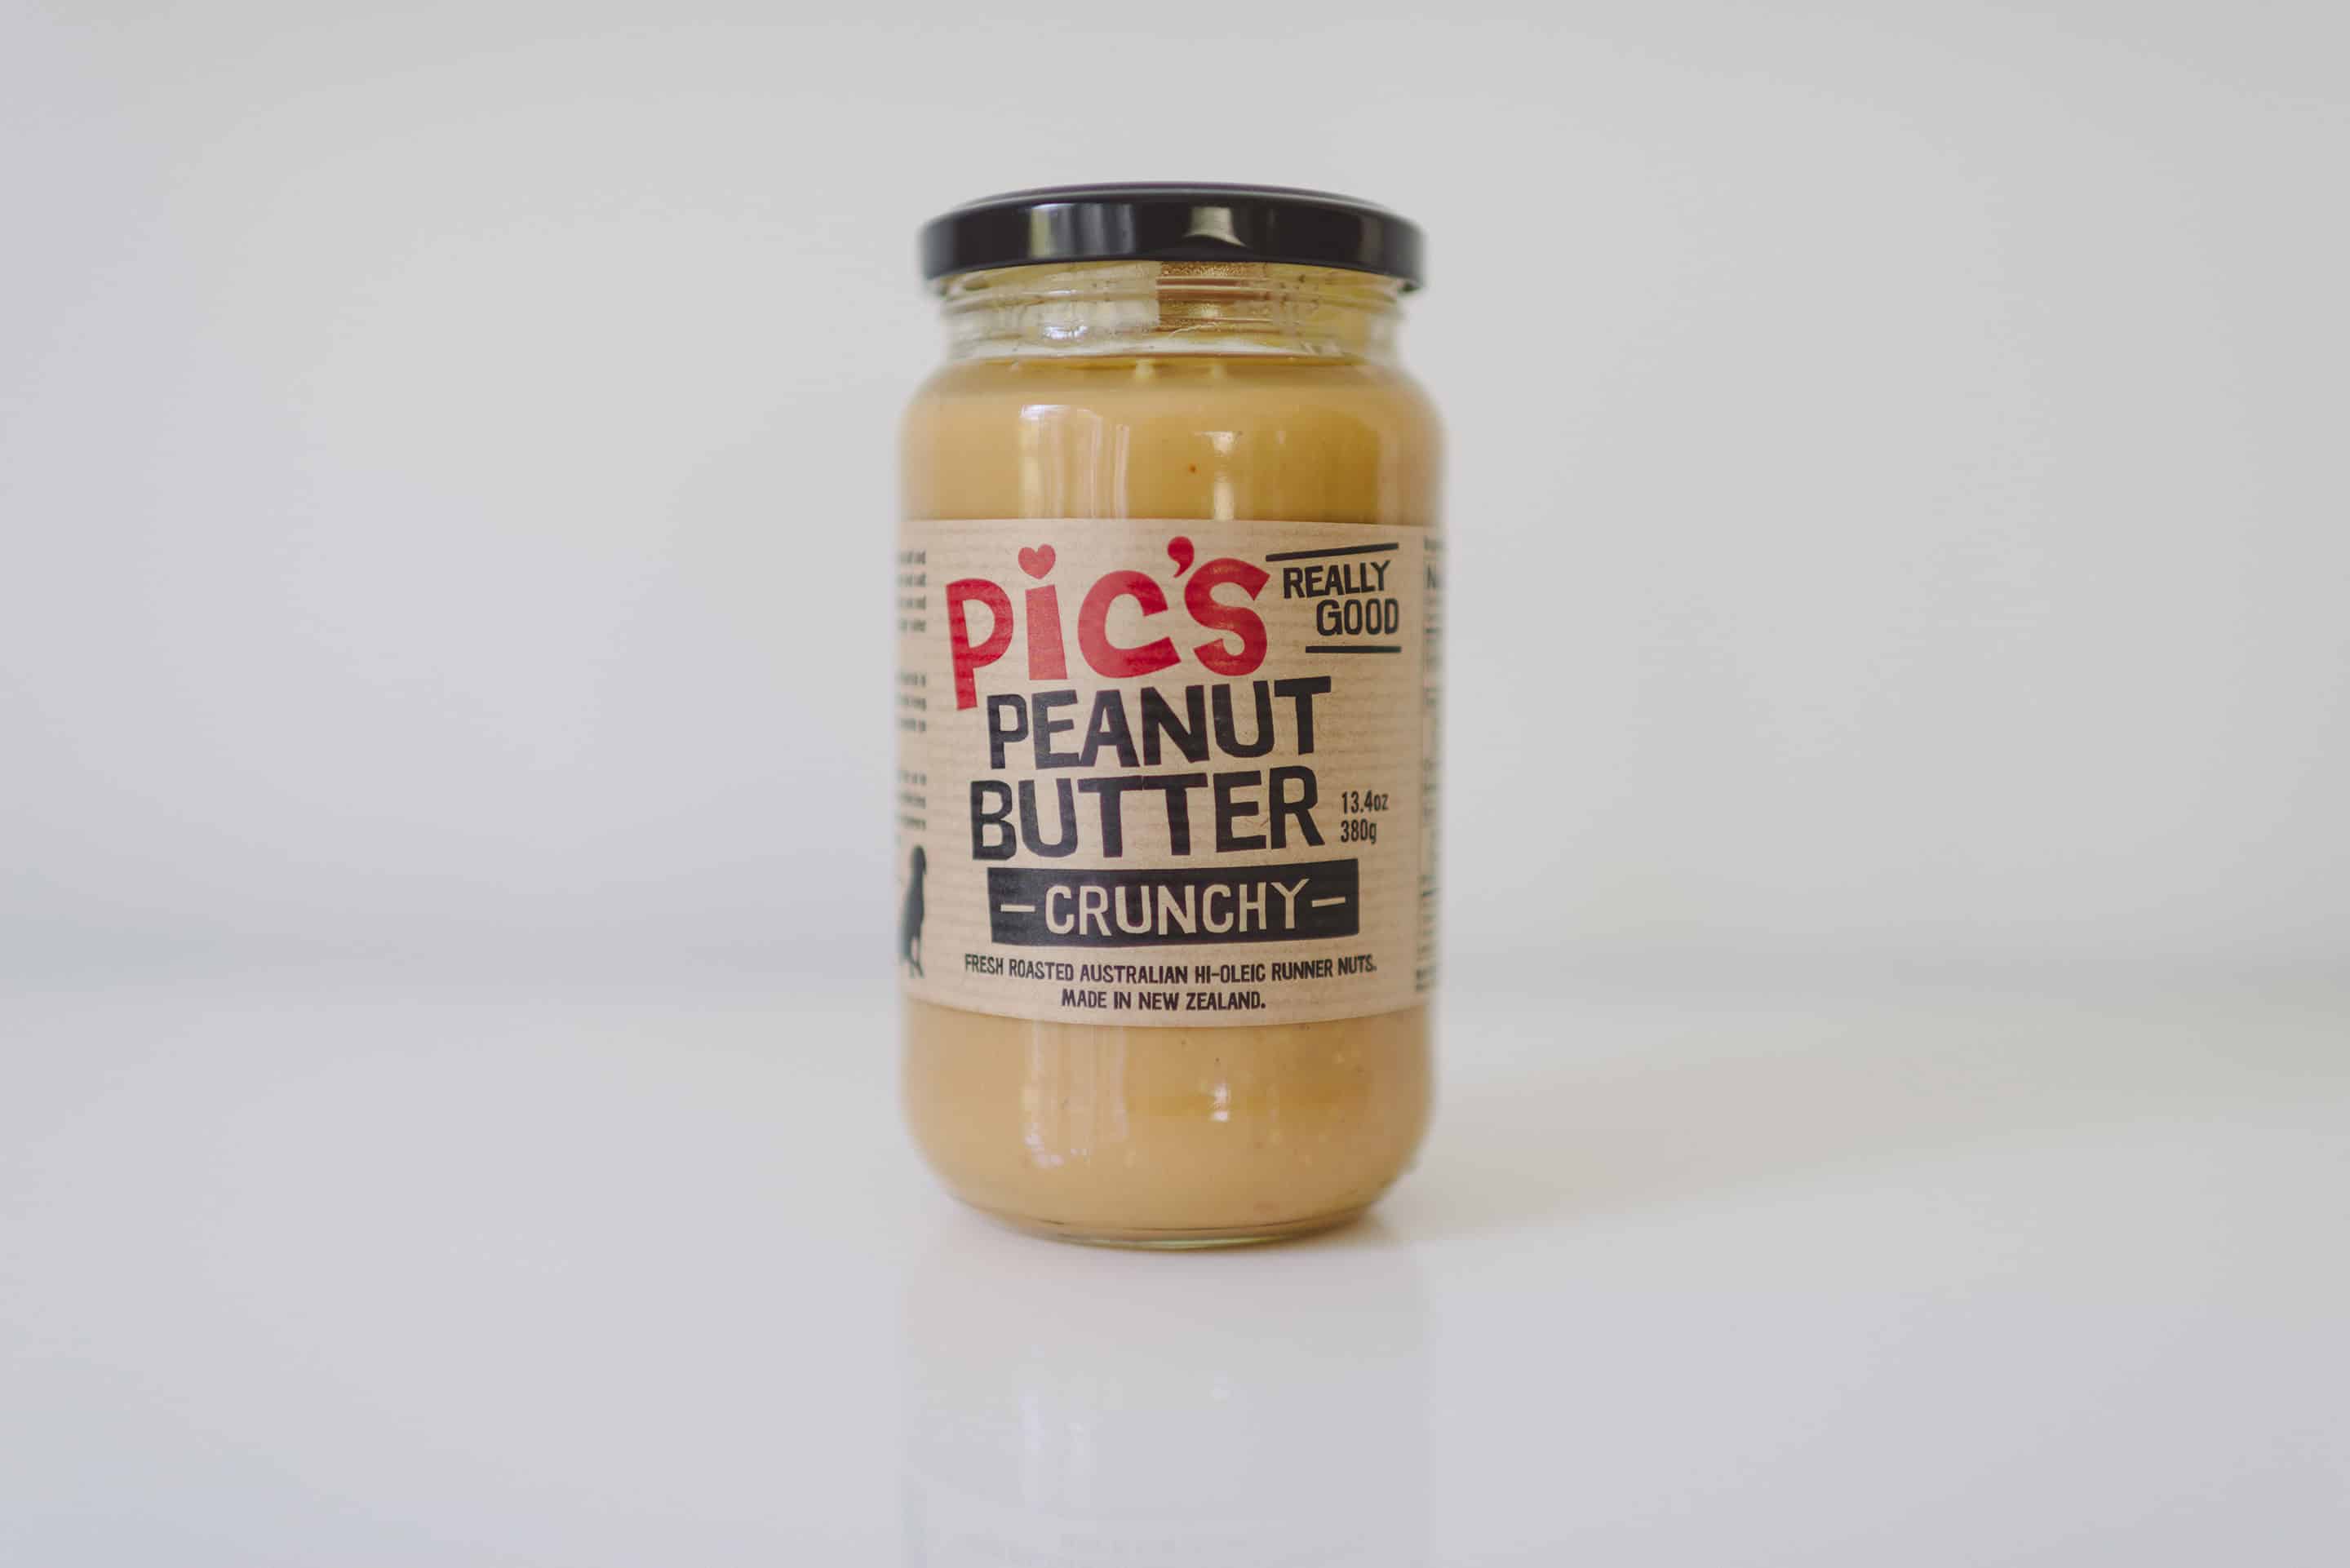 Pic's Really Good Peanut Butter - Dinner at Tiffani's Celebrity Crate